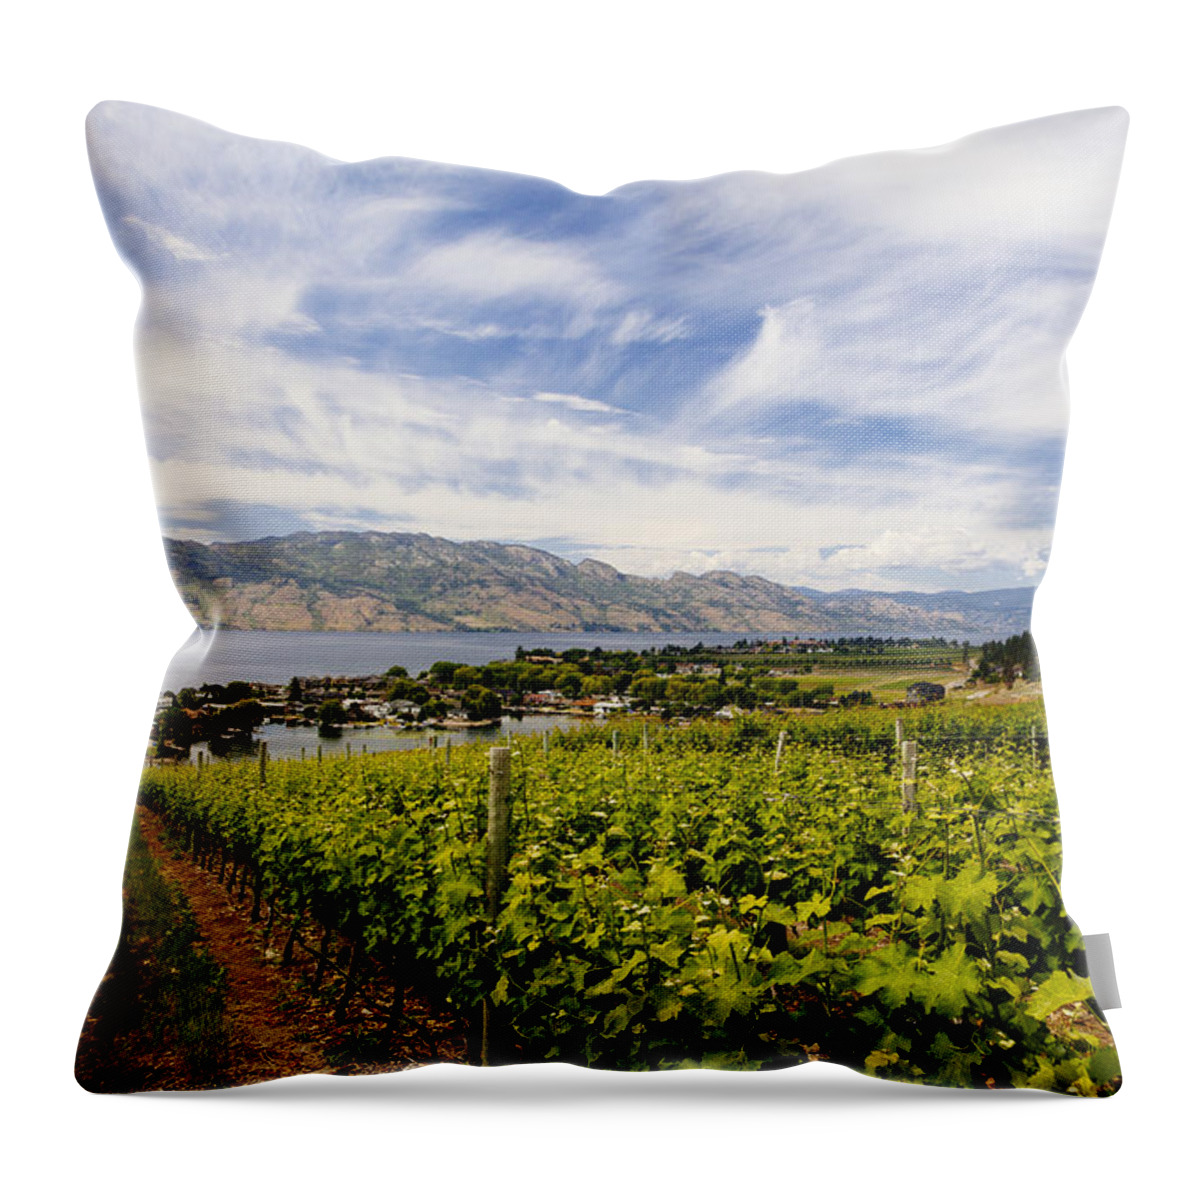 Landscape Throw Pillow featuring the photograph Vineyard View by Laura Tucker